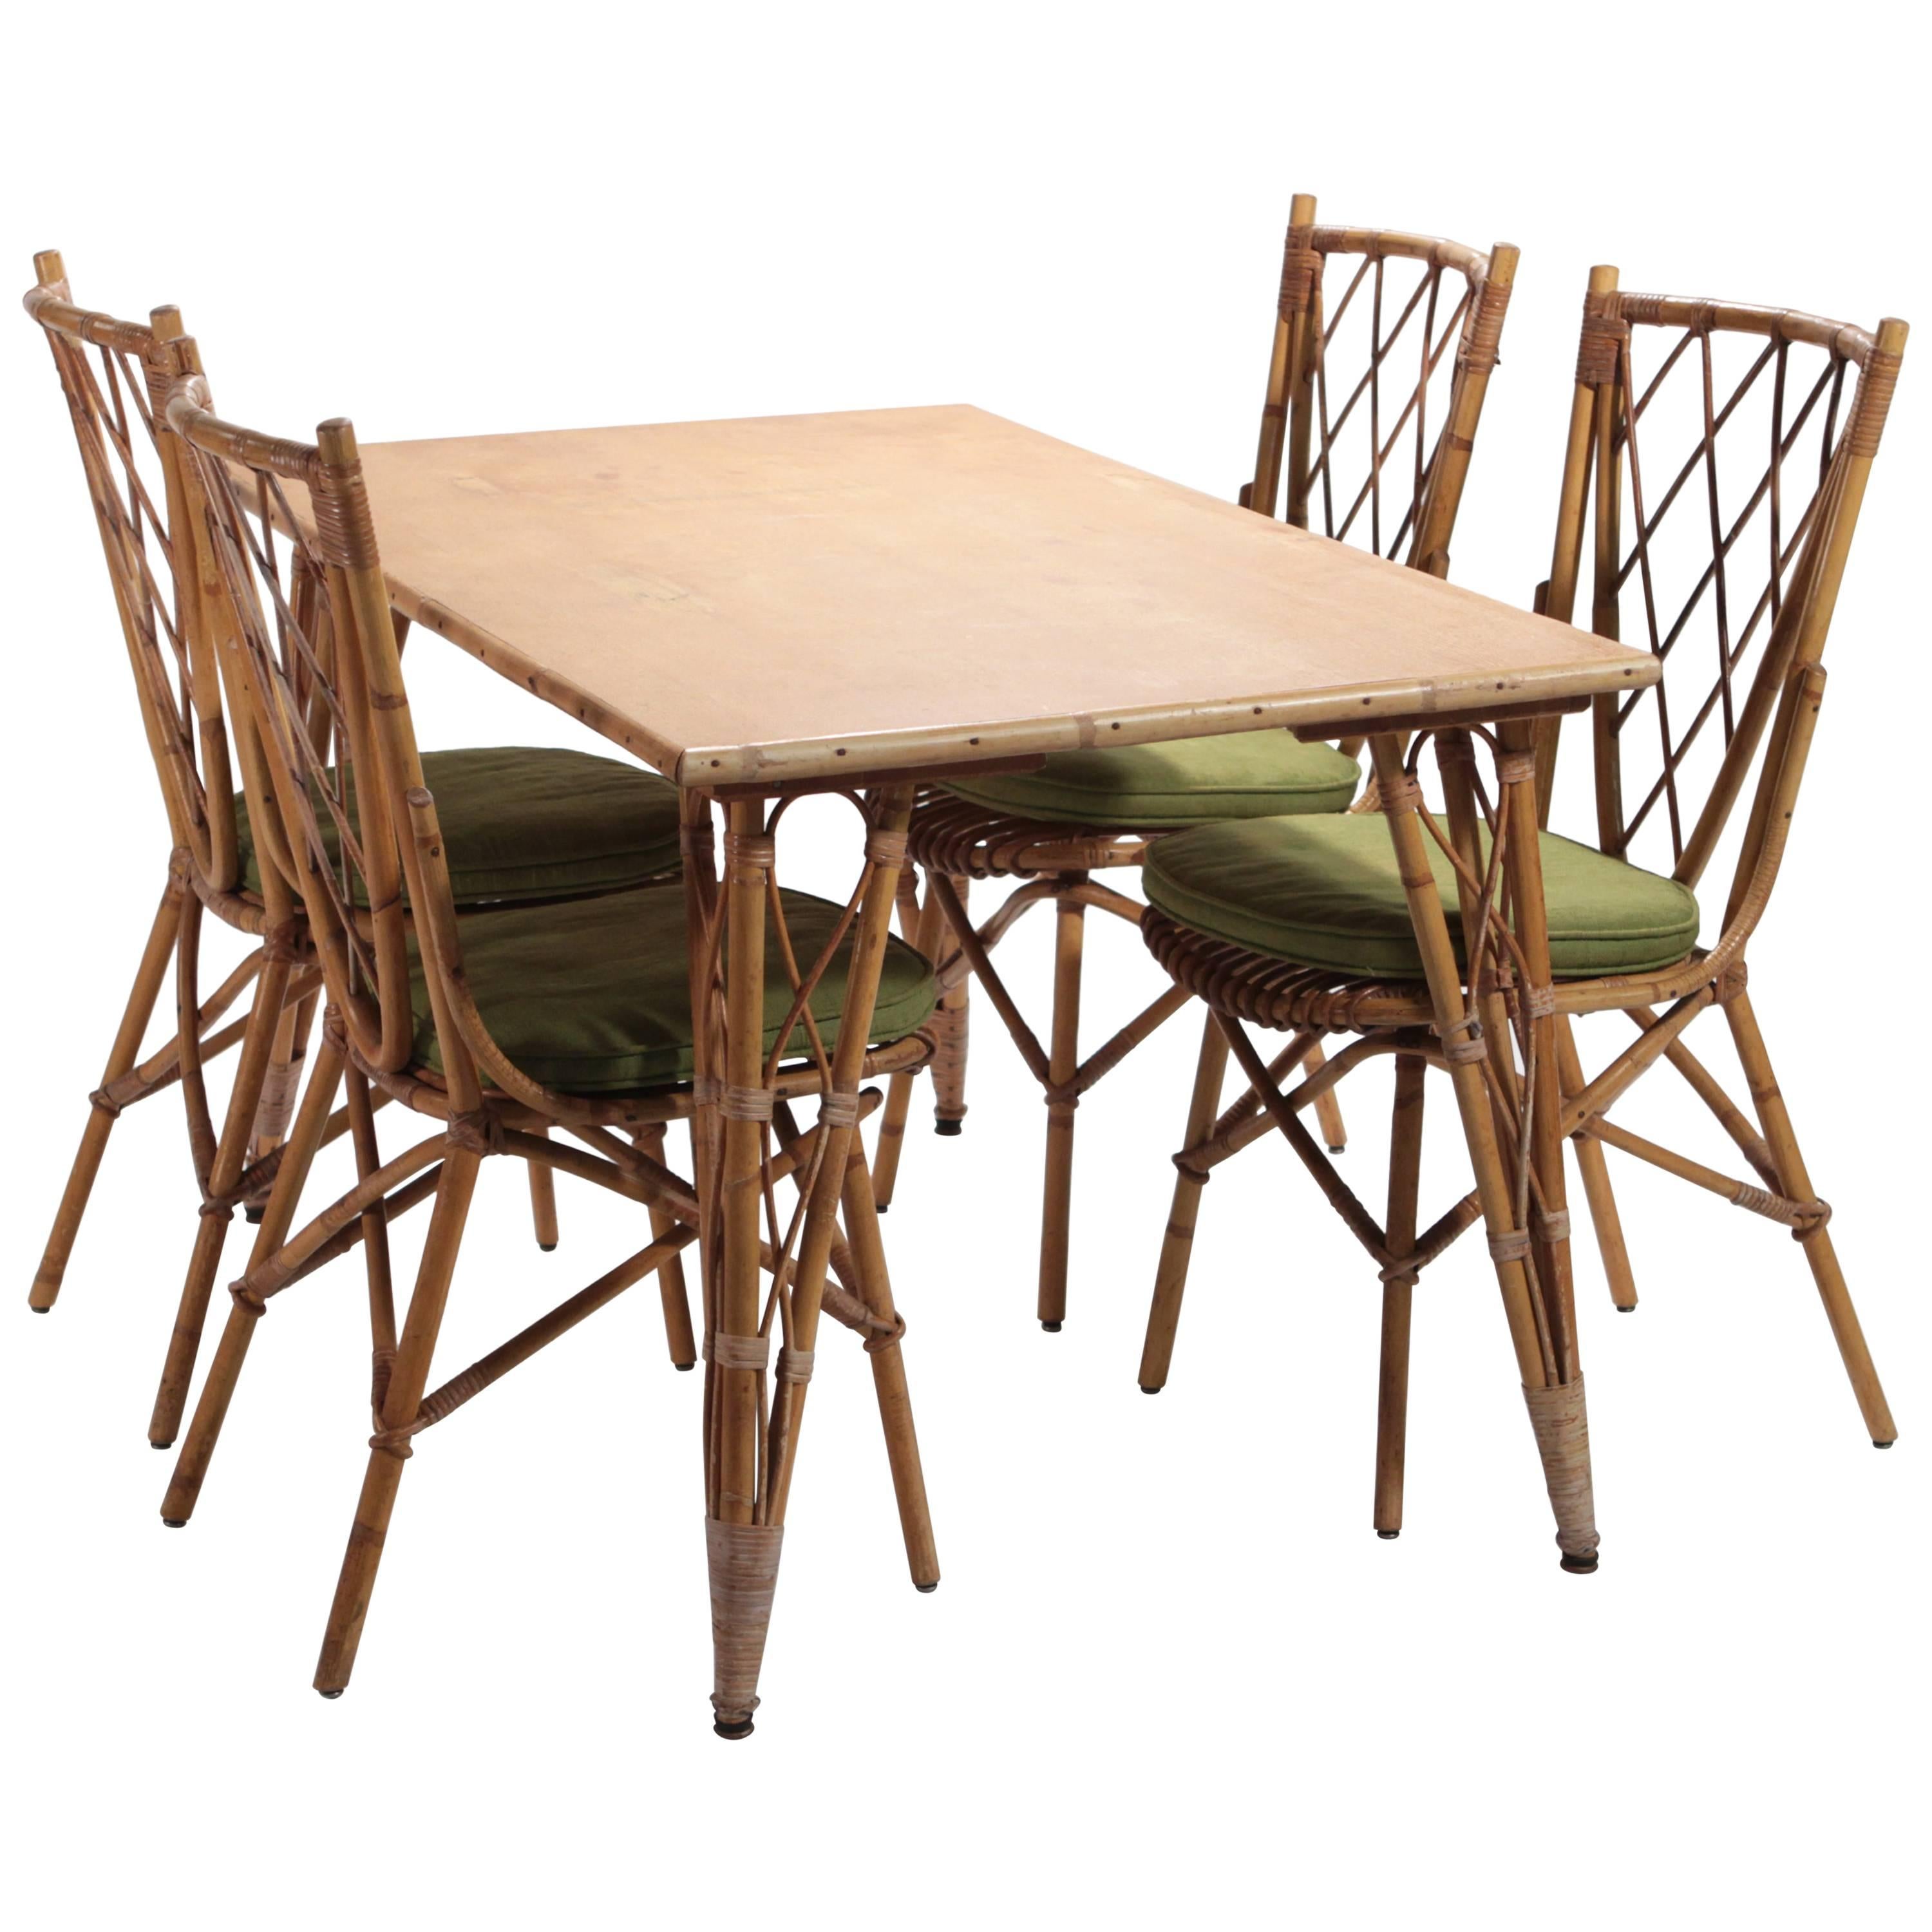 Vintage Five-Piece, Bamboo Outdoor Setting by Audoux Minet, 1950s